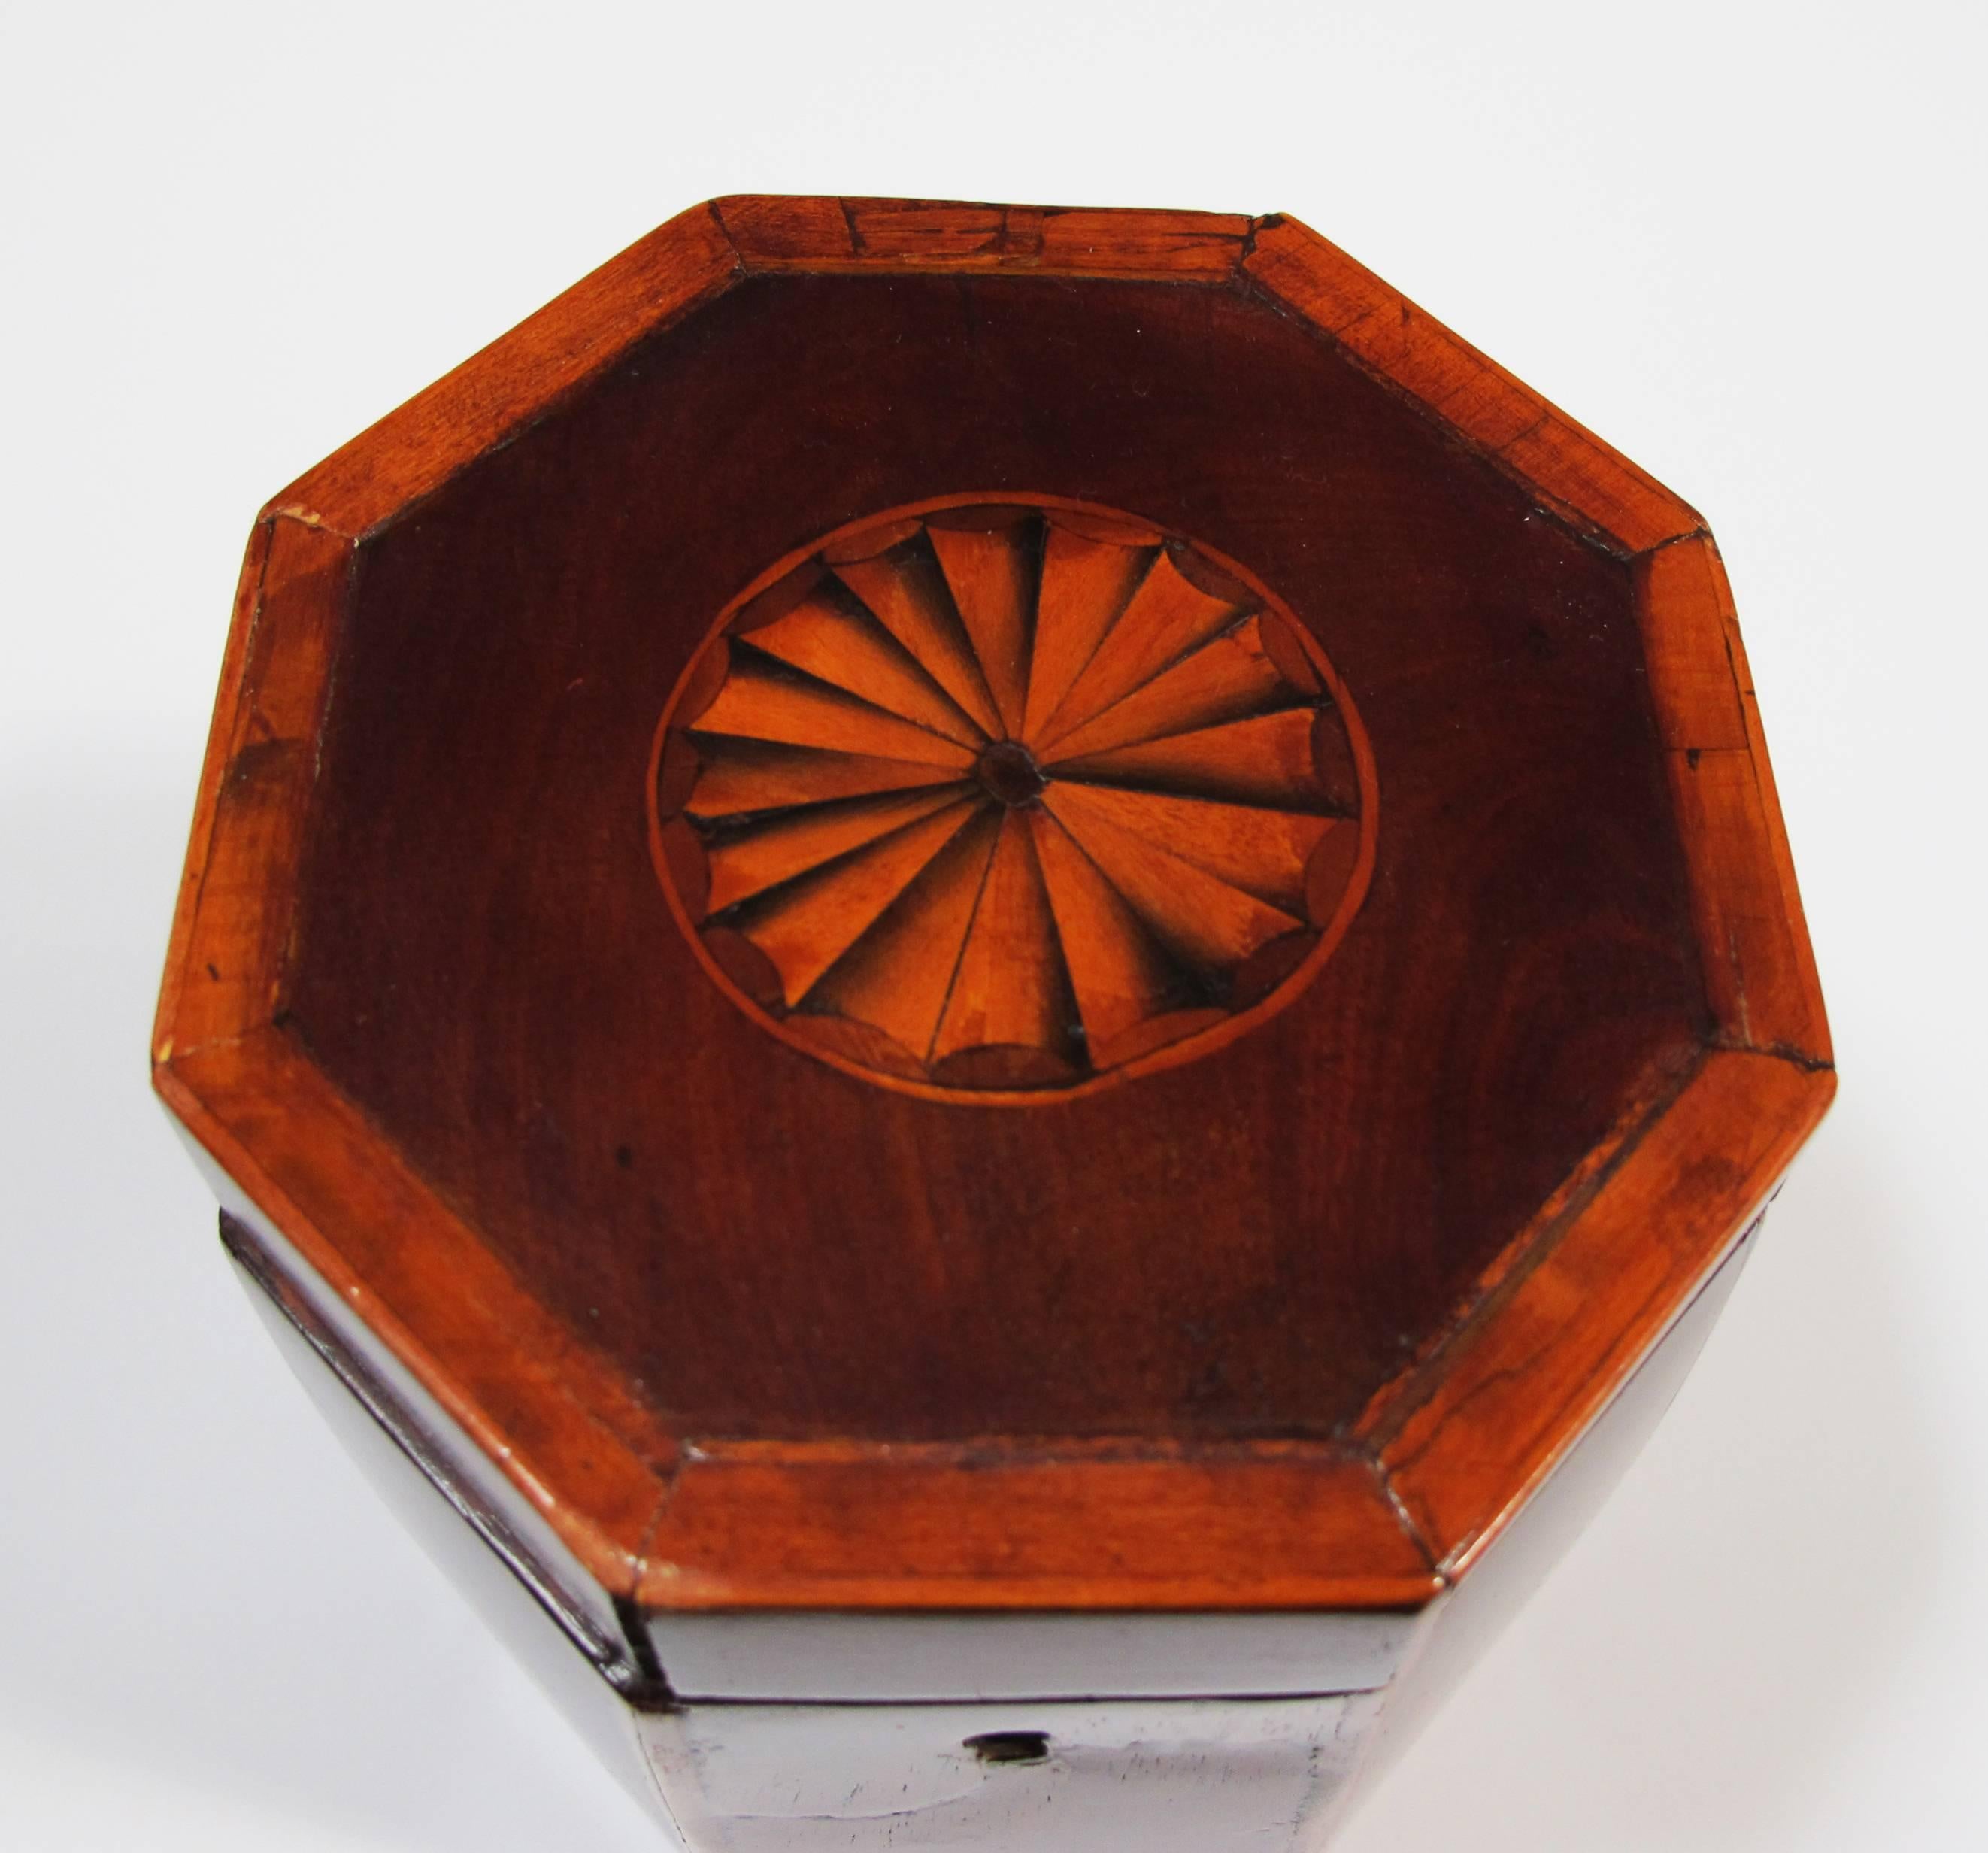 A shapely English Georgian octagonal lidded tea caddy with shell inlay; the octagonal lid centering an inlaid shell medallion all-over a conforming body.